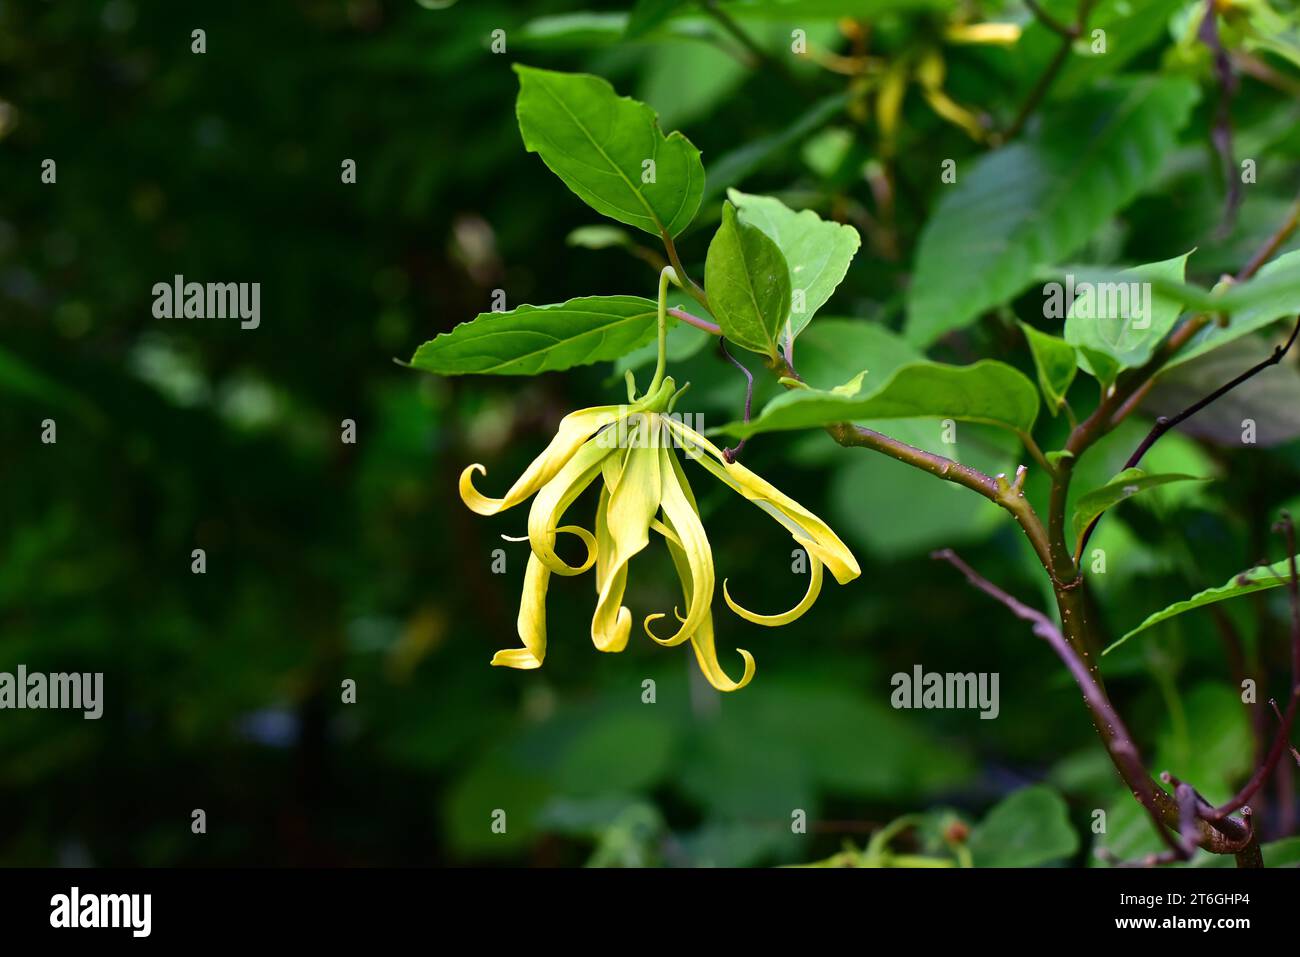 Cananga tree (Cananga odorata) is an evergreen tree native to tropical Asia. Its flowers named ylang-ylang are highly appreciated in perfumery. This p Stock Photo